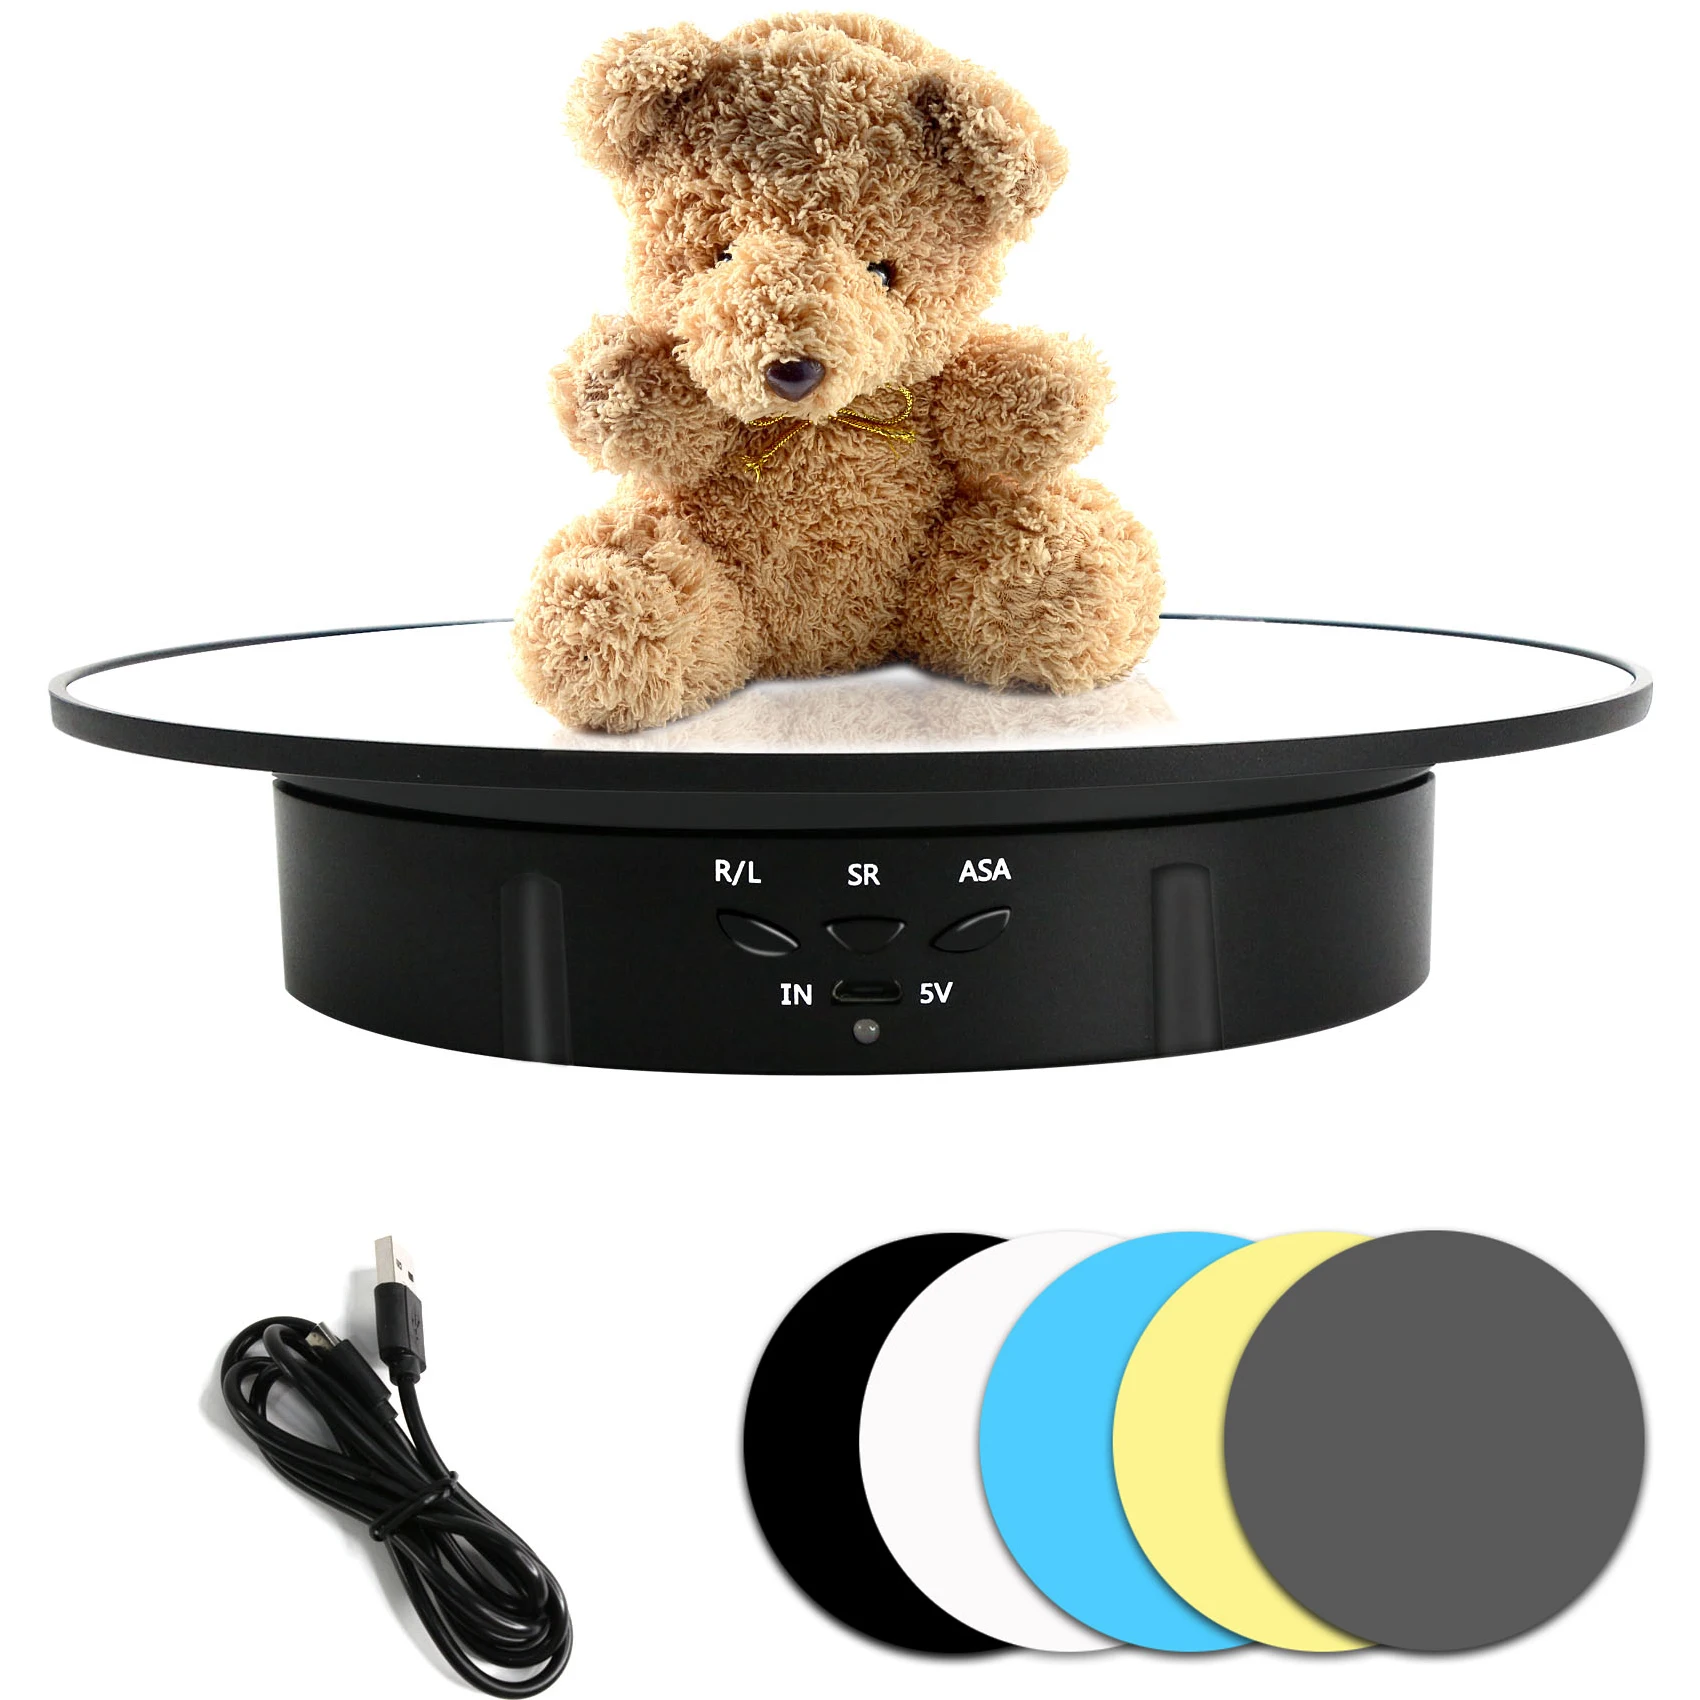 Turntable Display Stand 360 Degree Electric Motorized Rotating Turntable  For Photography Display 17.6lb Load (20cm With Mirror) - Photo Studio Kits  - AliExpress